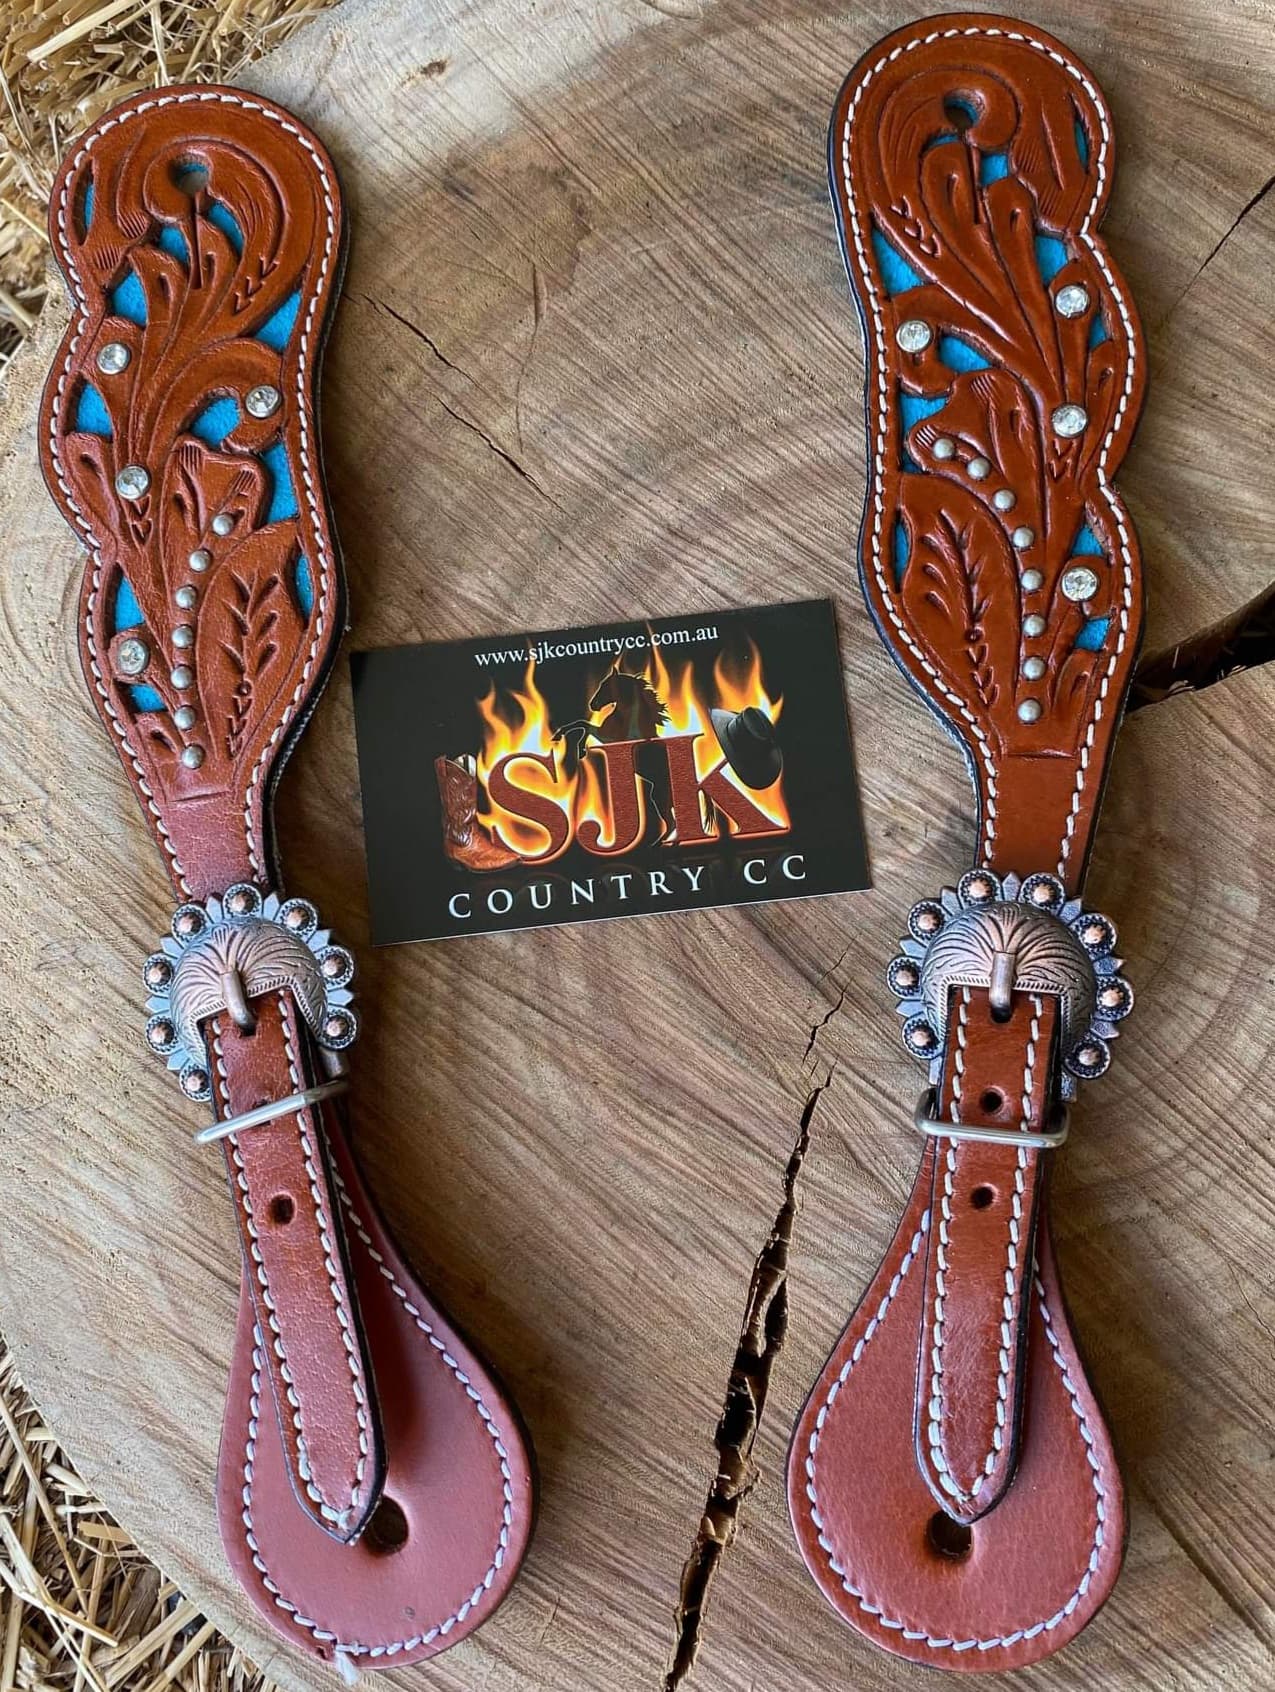 Straps - Ladies Size Spur Straps with turquoise Inlay